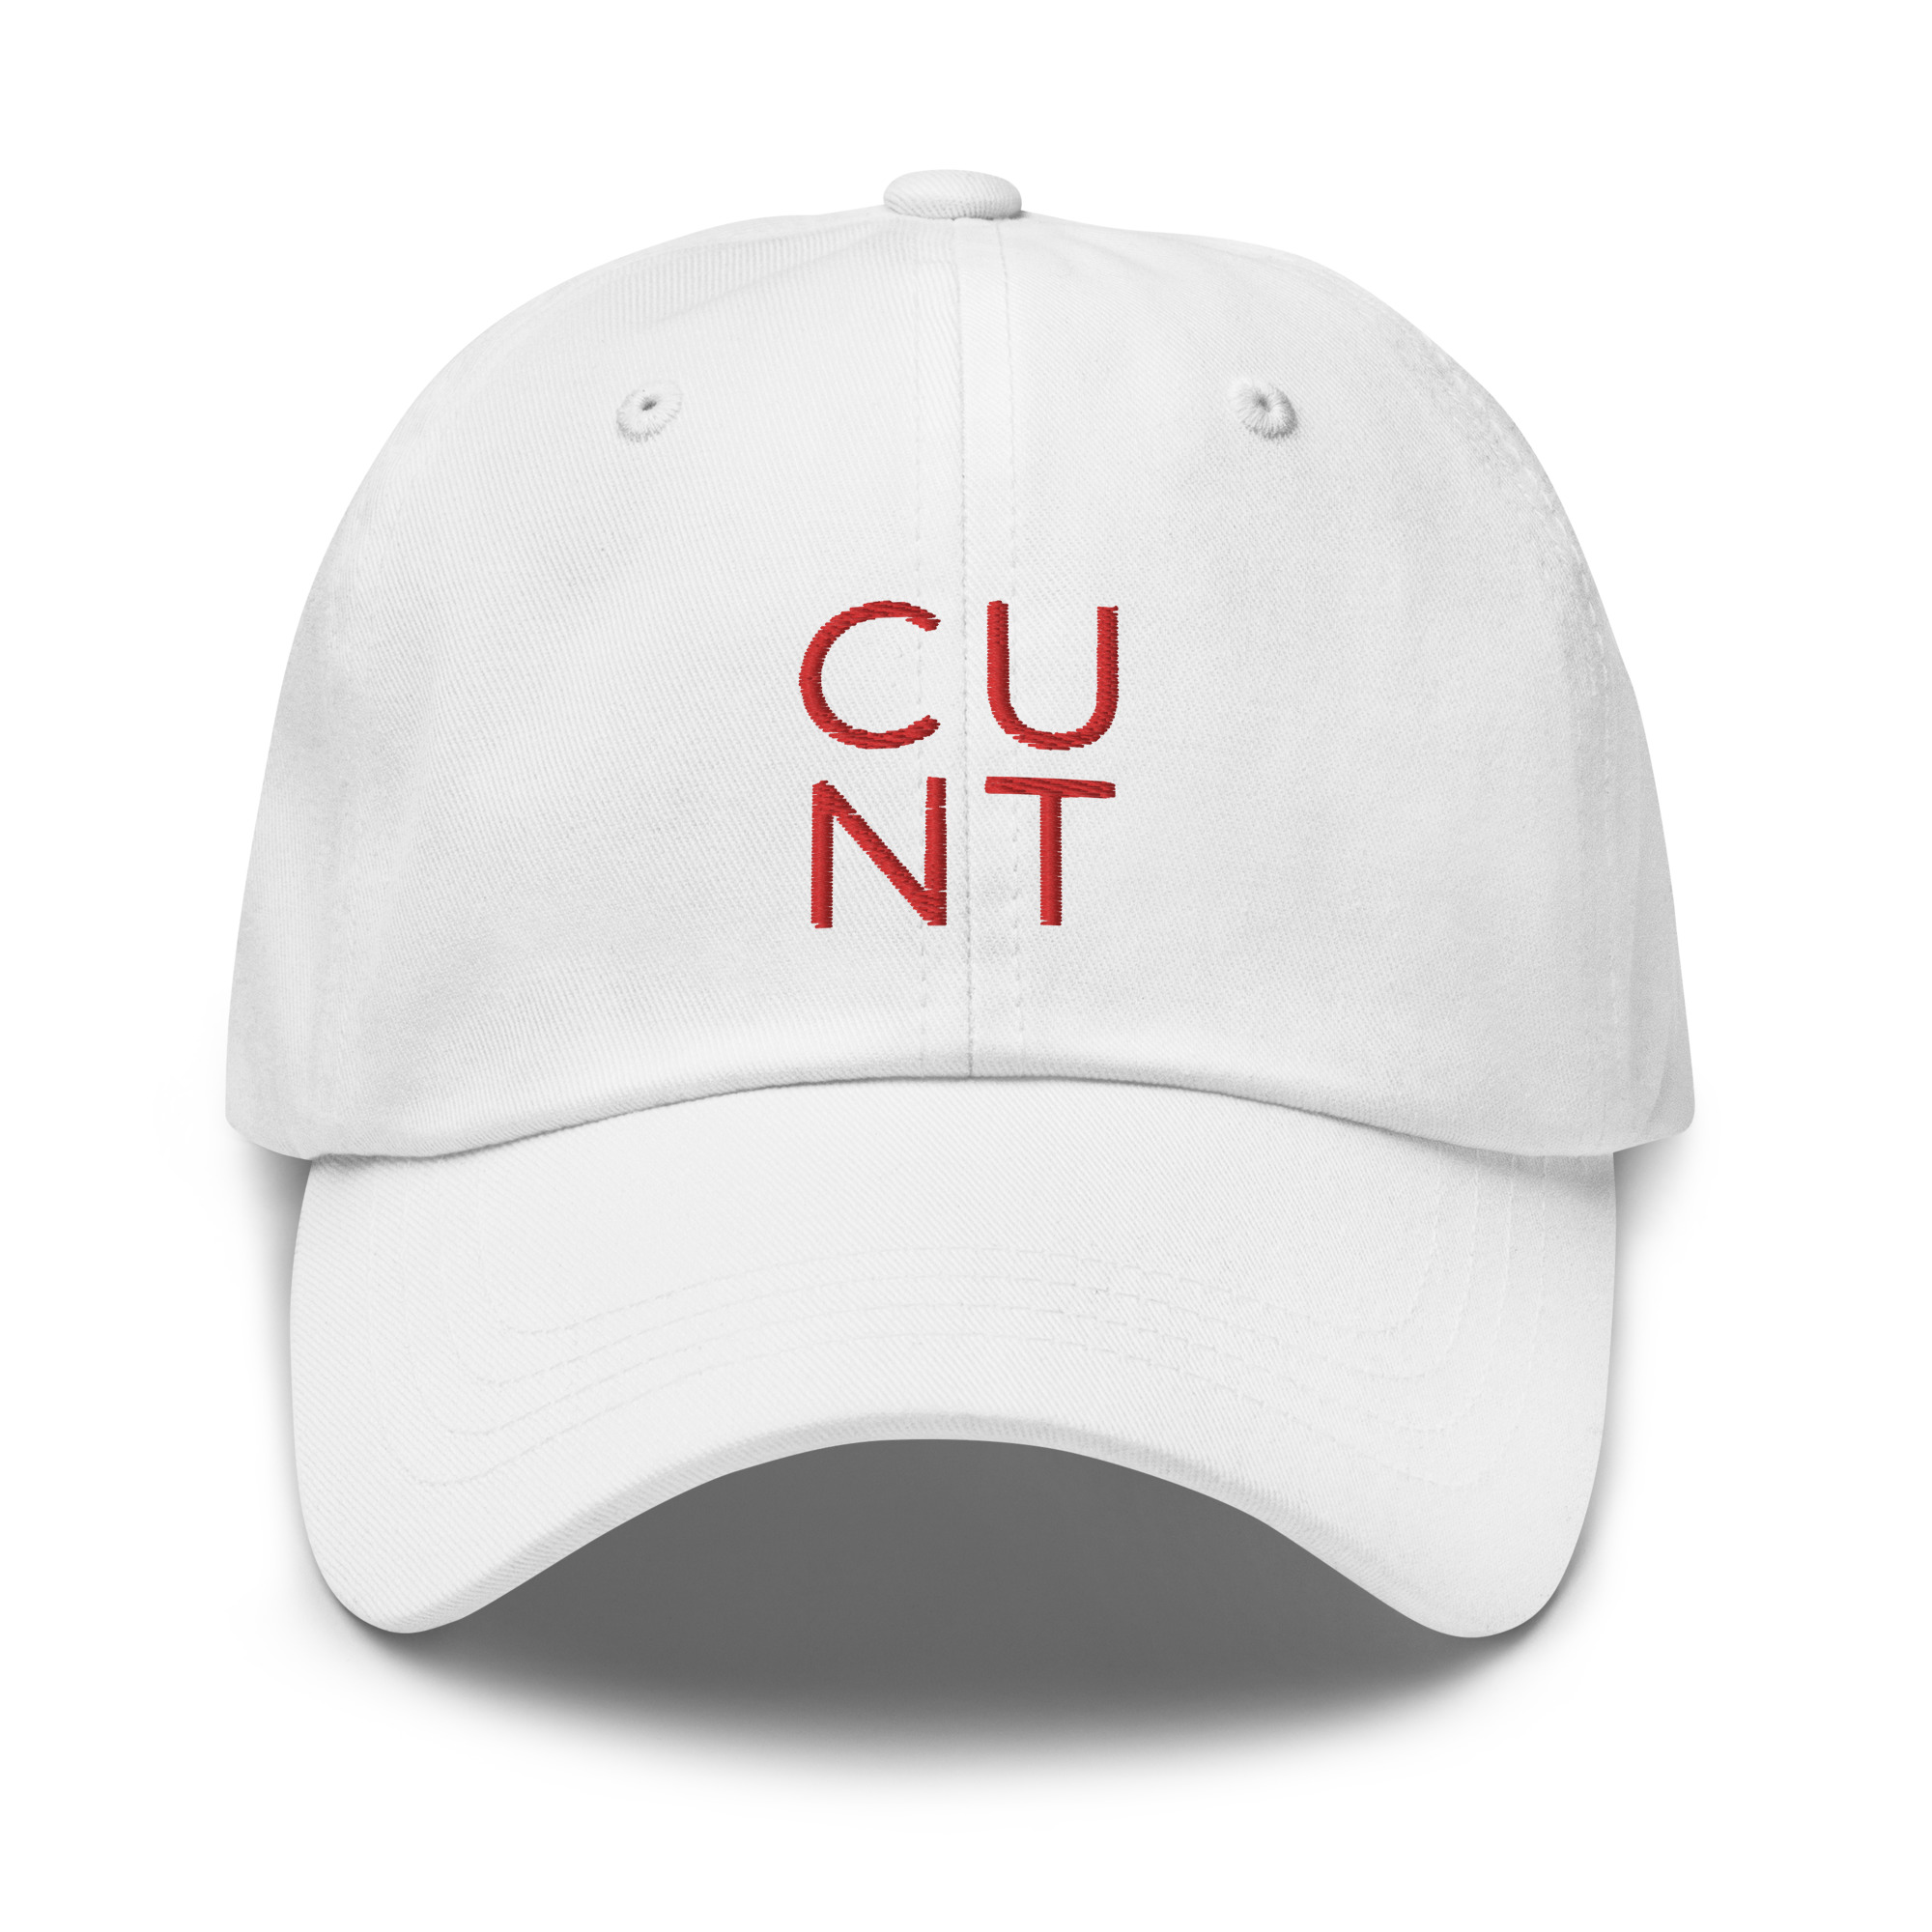 classic-dad-hat-white-front-62f2ac332209e.jpg